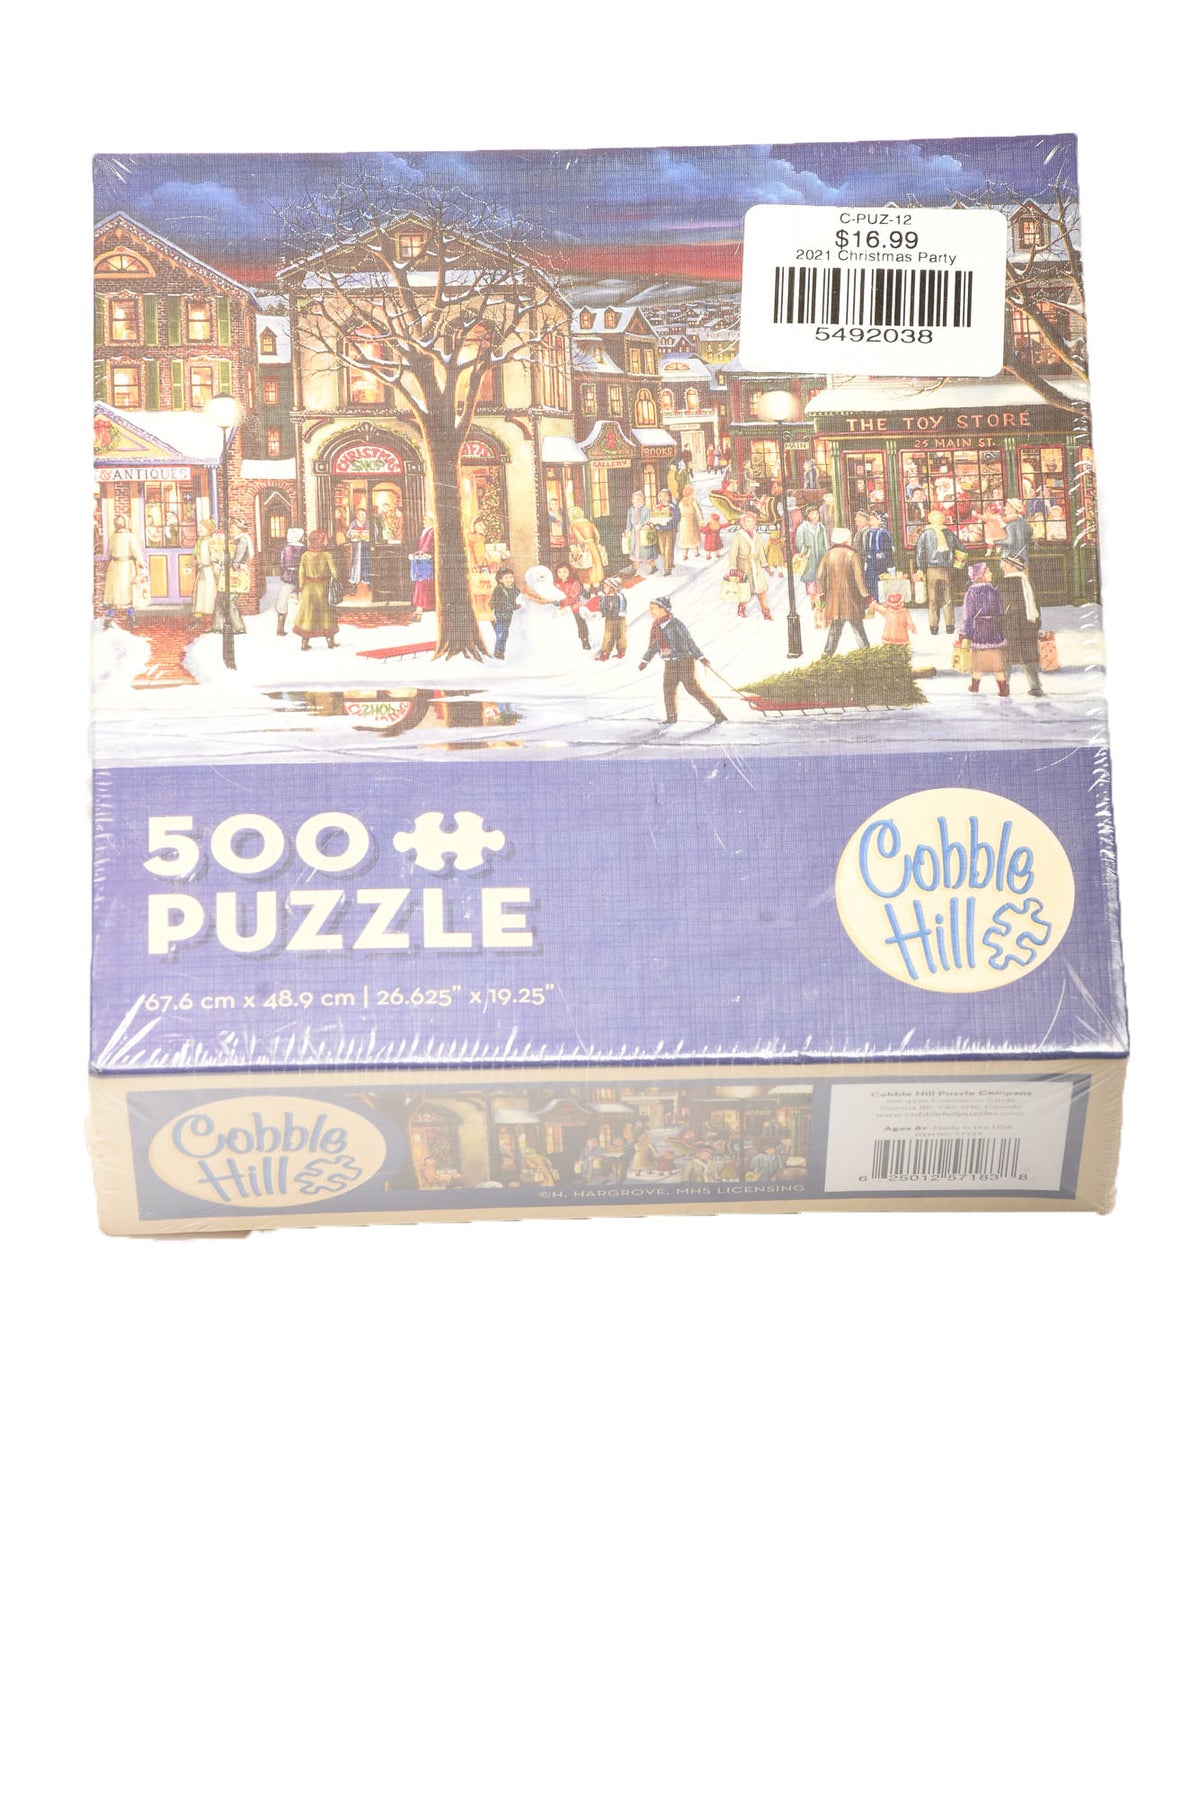 Puzzle By Cobble Hill